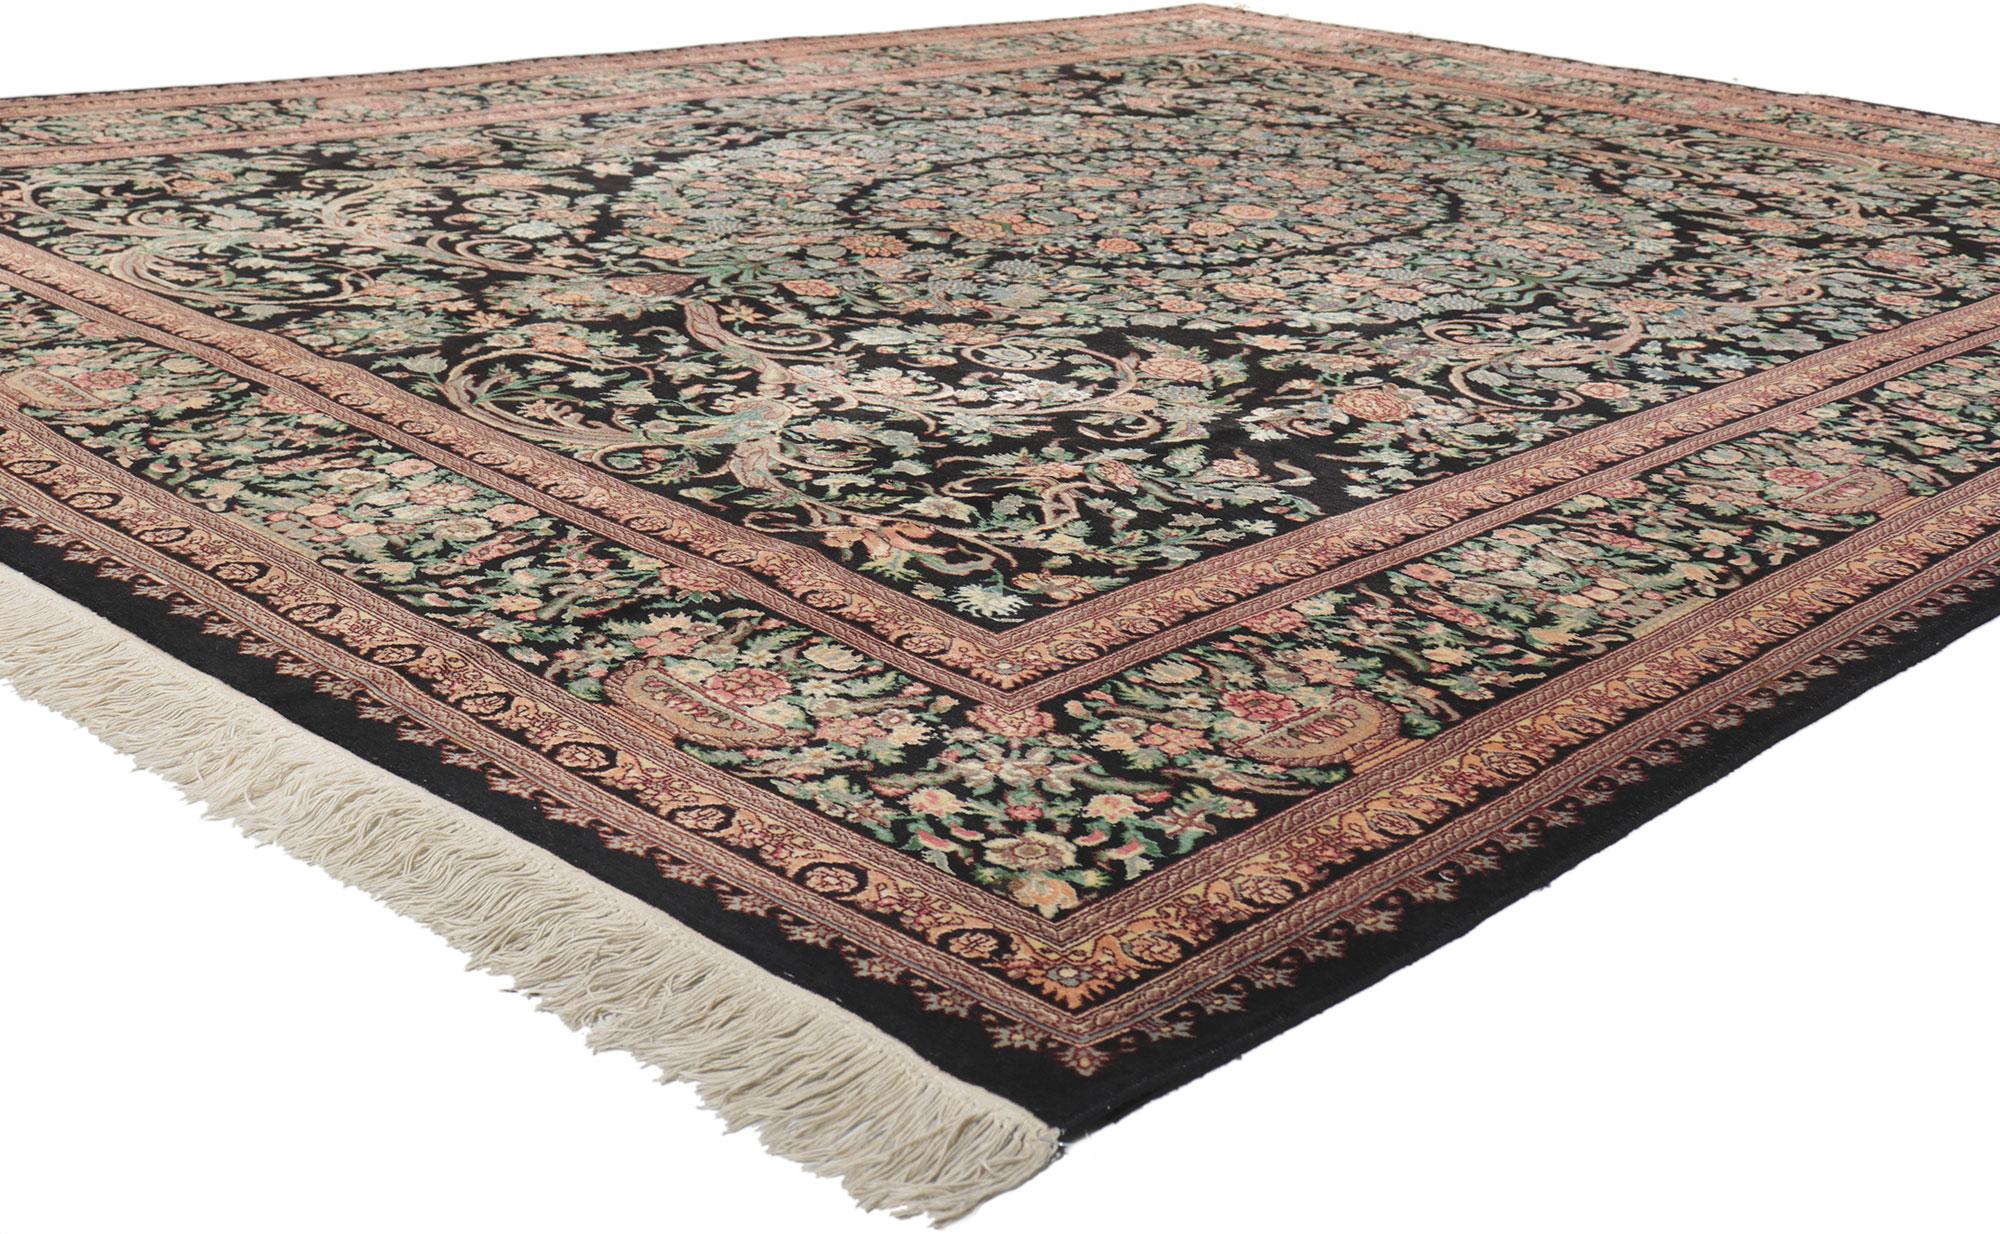 76773 Vintage French Aubusson Style Rug, 09'00 x 11'06.
Drawing inspiration from Mario Buatta and Chintz style, this hand-knotted wool vintage Aubusson style garden area rug features the full blossoms of flower garlands similar to those found in the